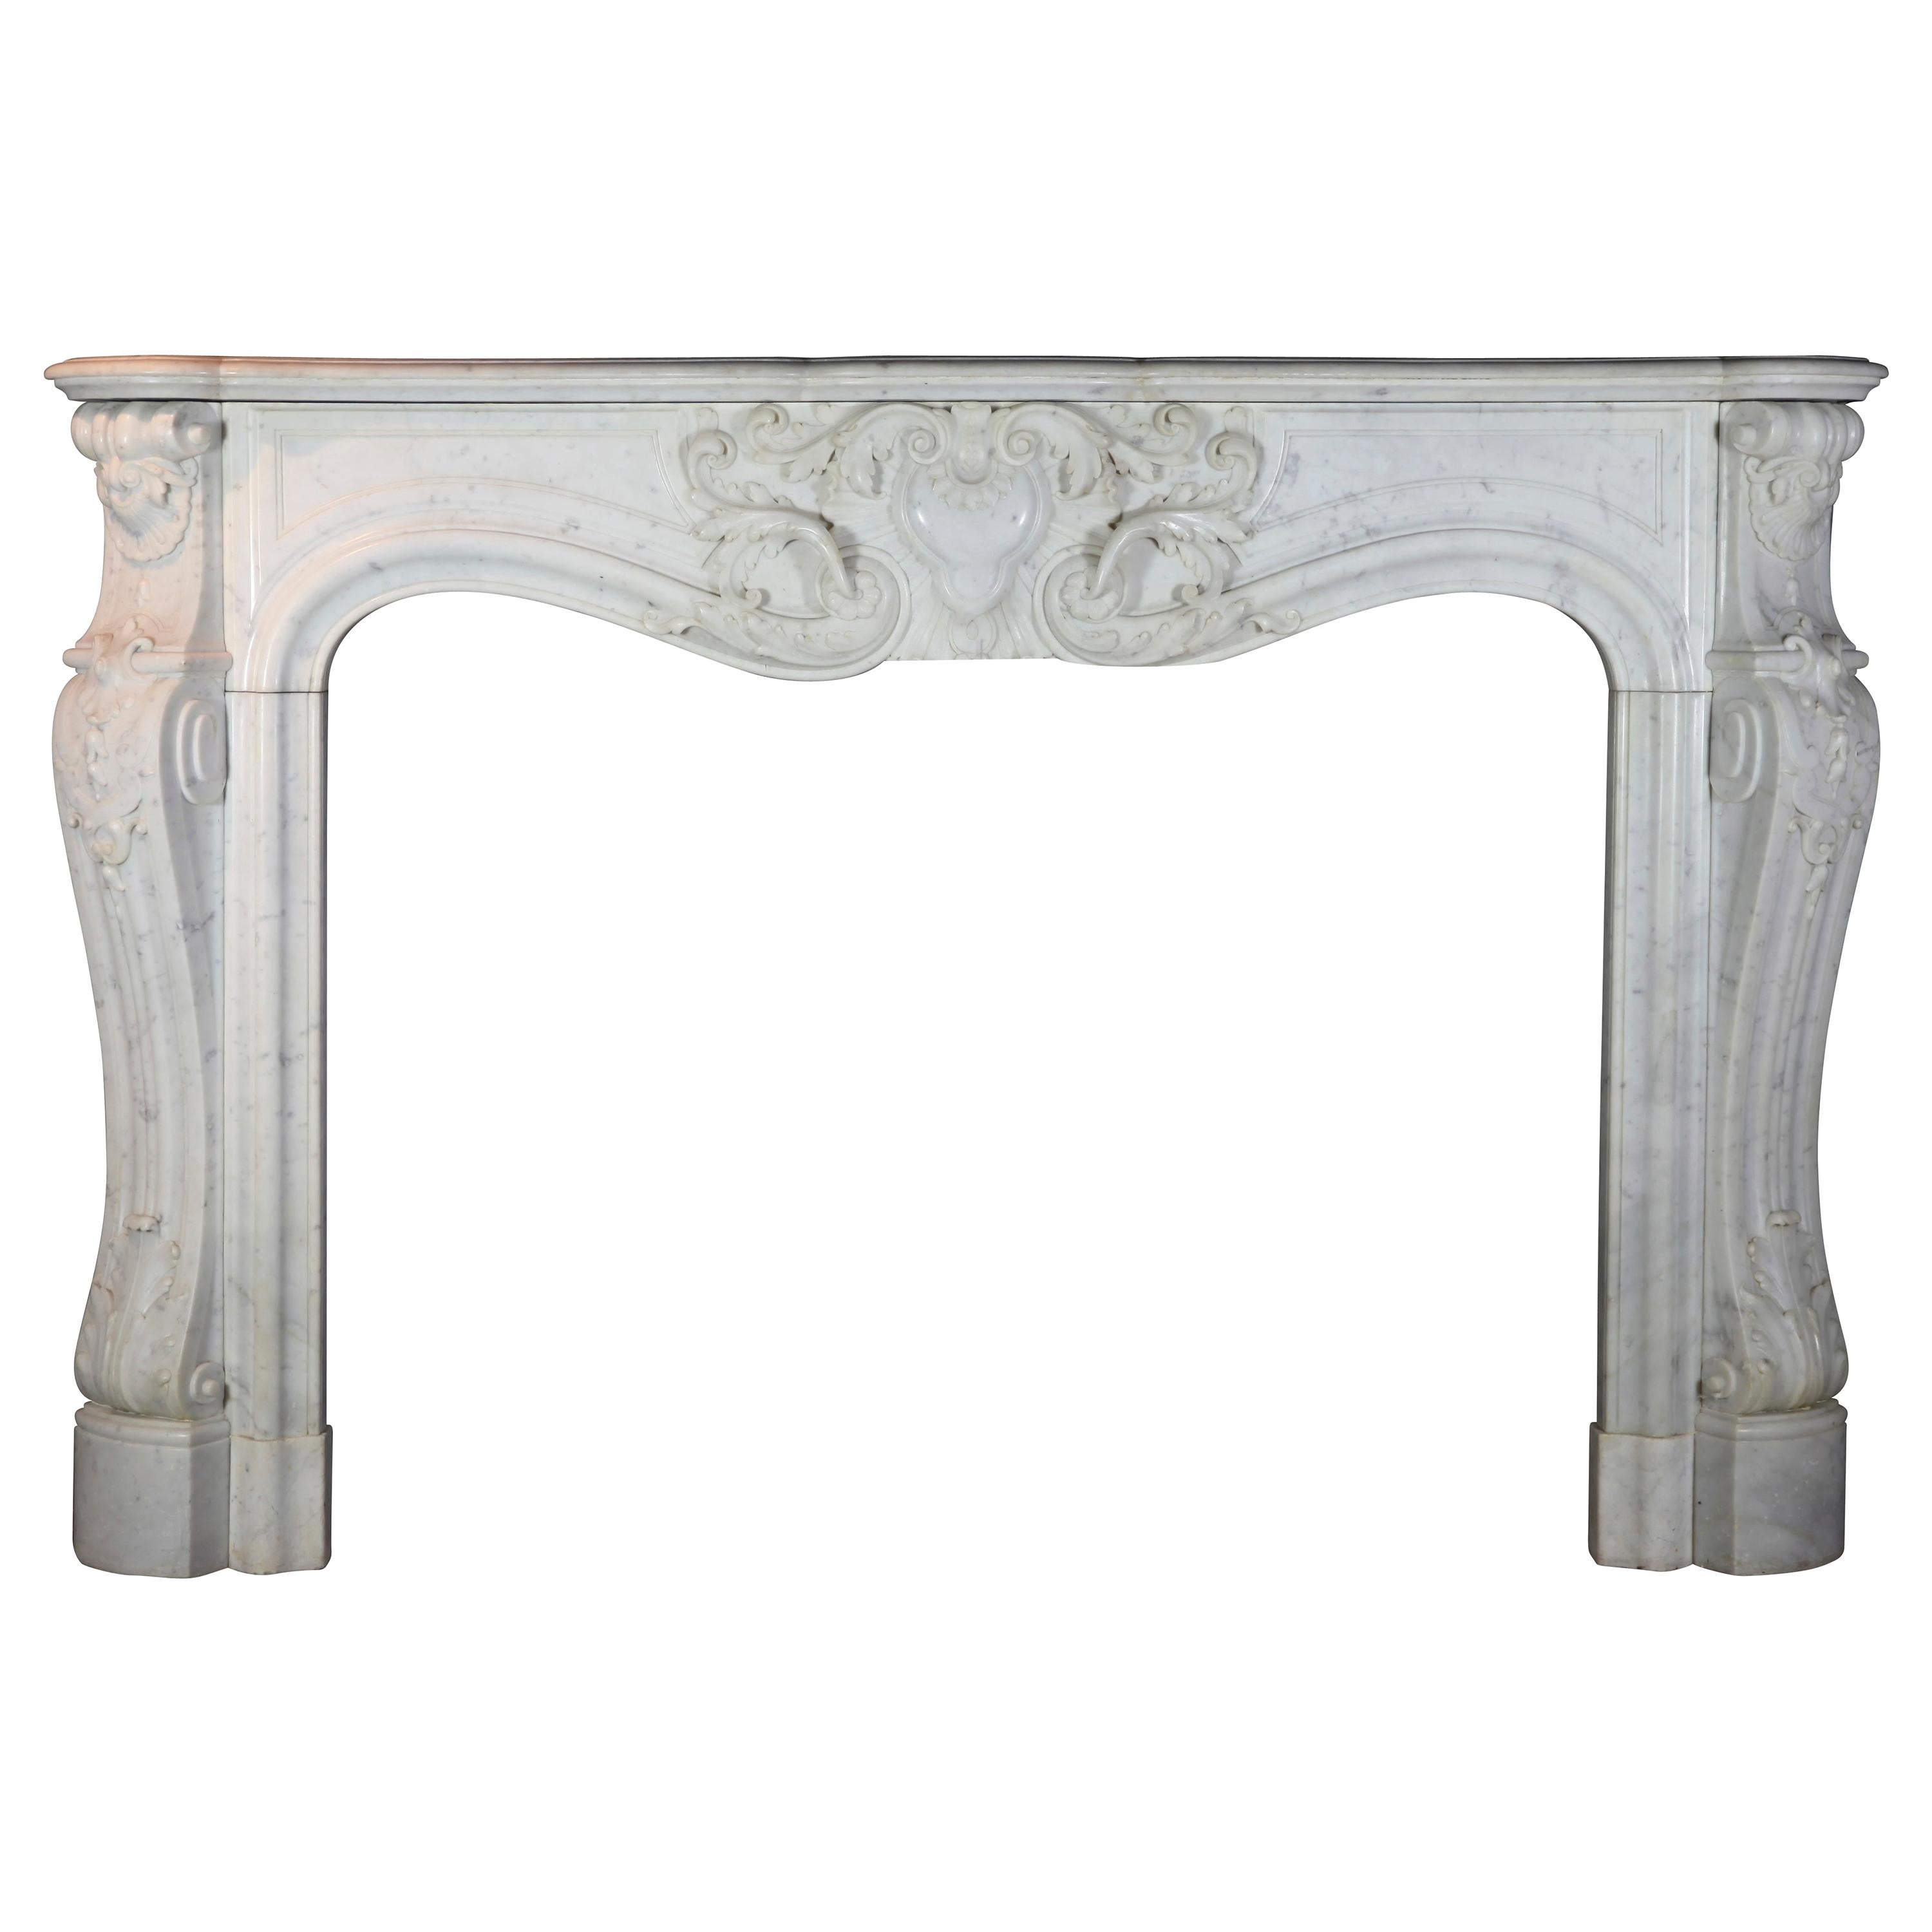 French Grand Interior Antique Fireplace Surround in Carrara White Marble For Sale